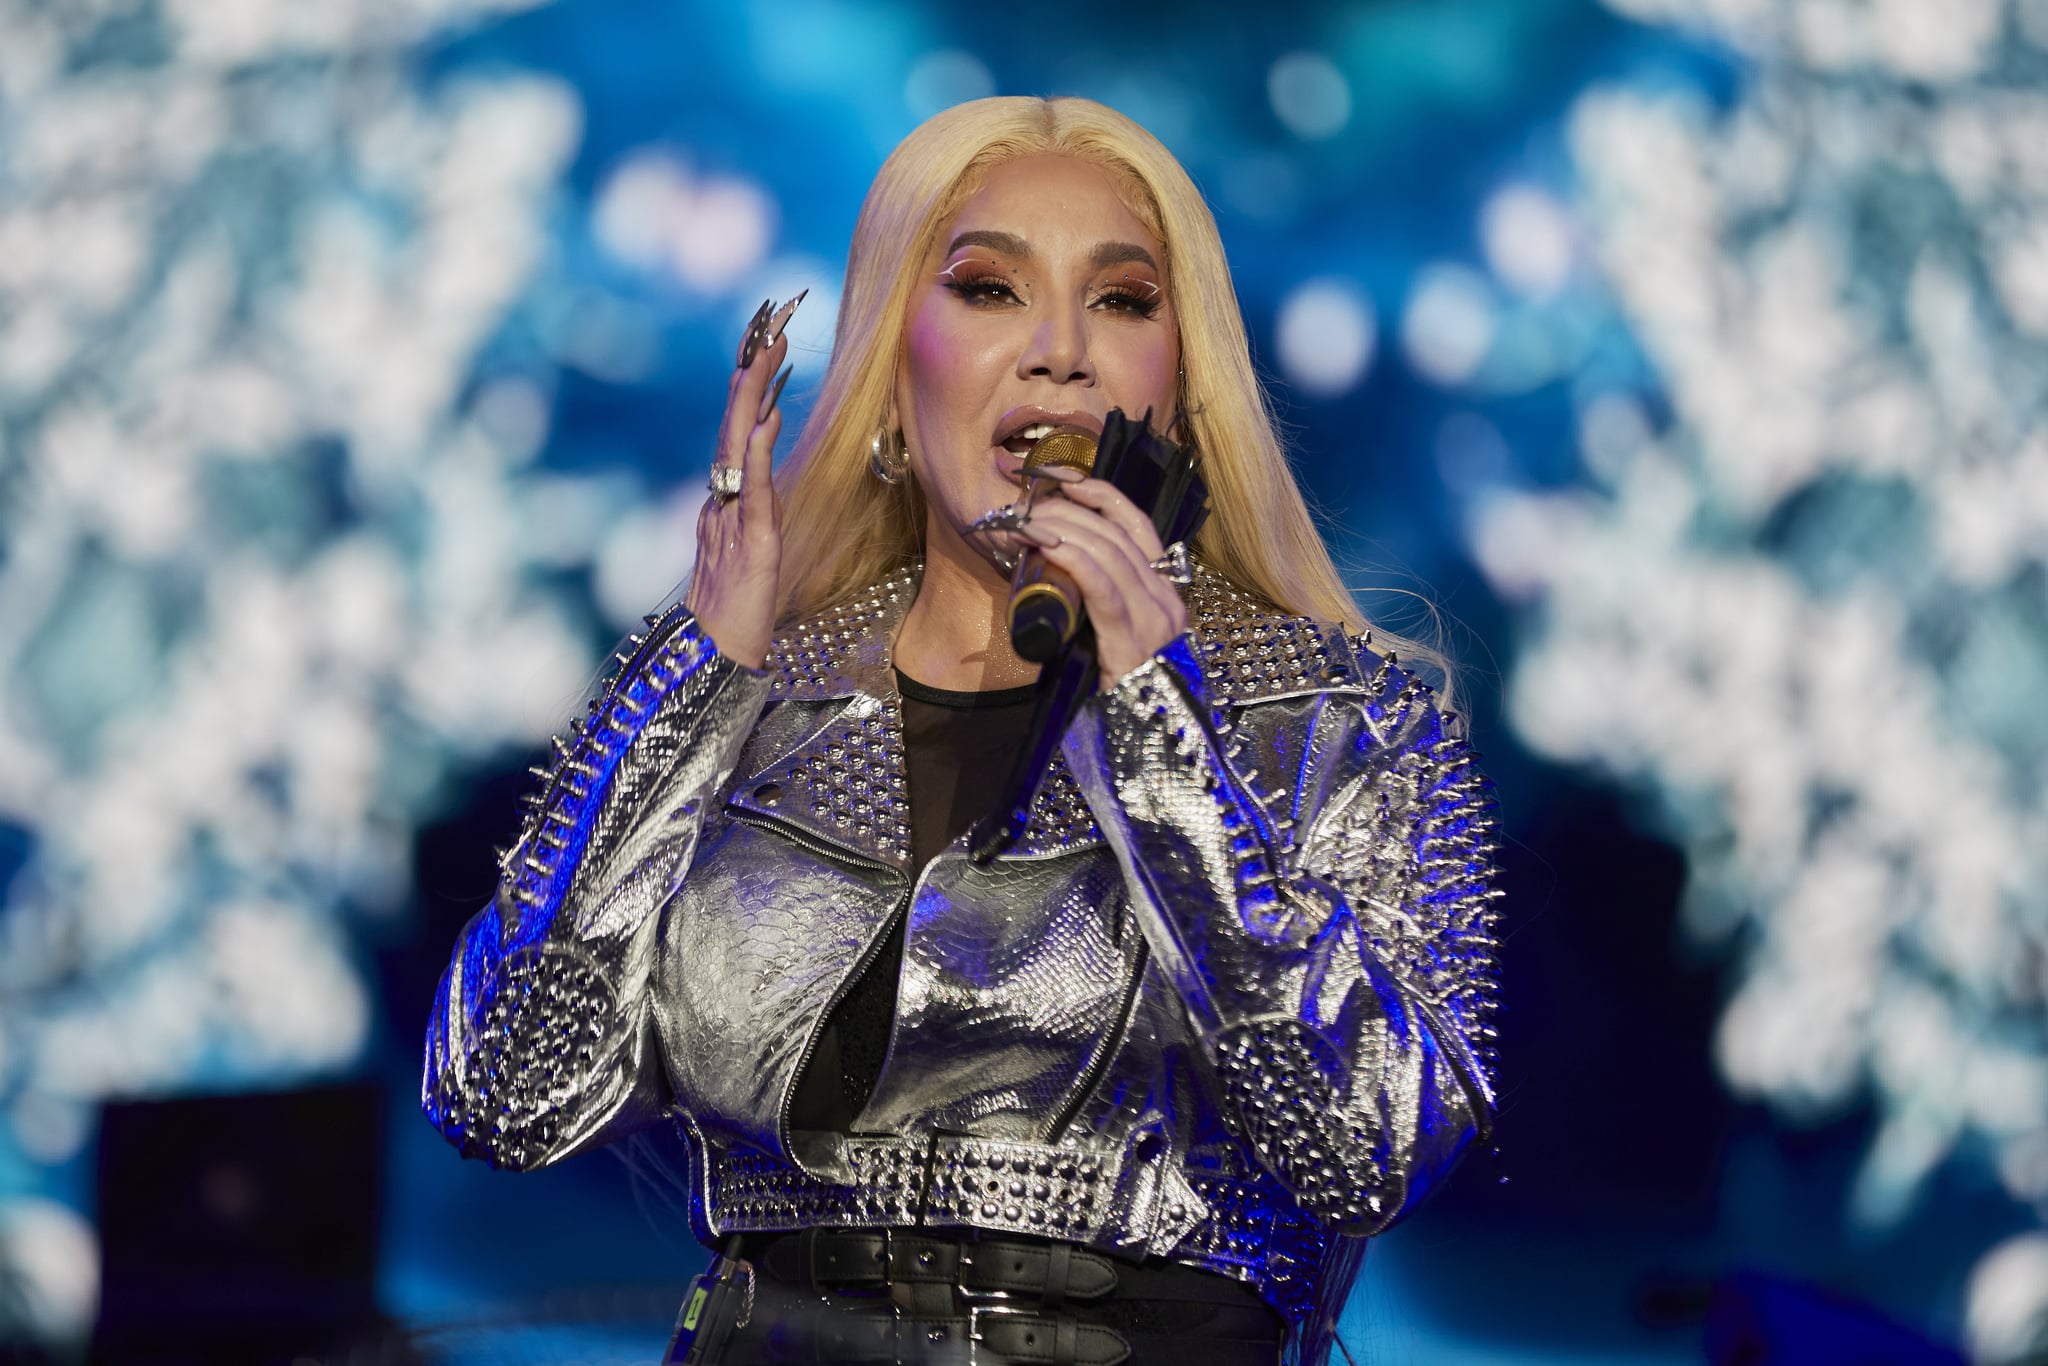 MEXICO CITY, MEXICO - NOVEMBER 26: Singer Ivy Queen performs during the Flow Fest 2023 at Autodromo Hermanos Rodriguez on November 26, 2023 in Mexico City, Mexico. (Photo by Jaime Nogales/Medios y Media/Getty Images)